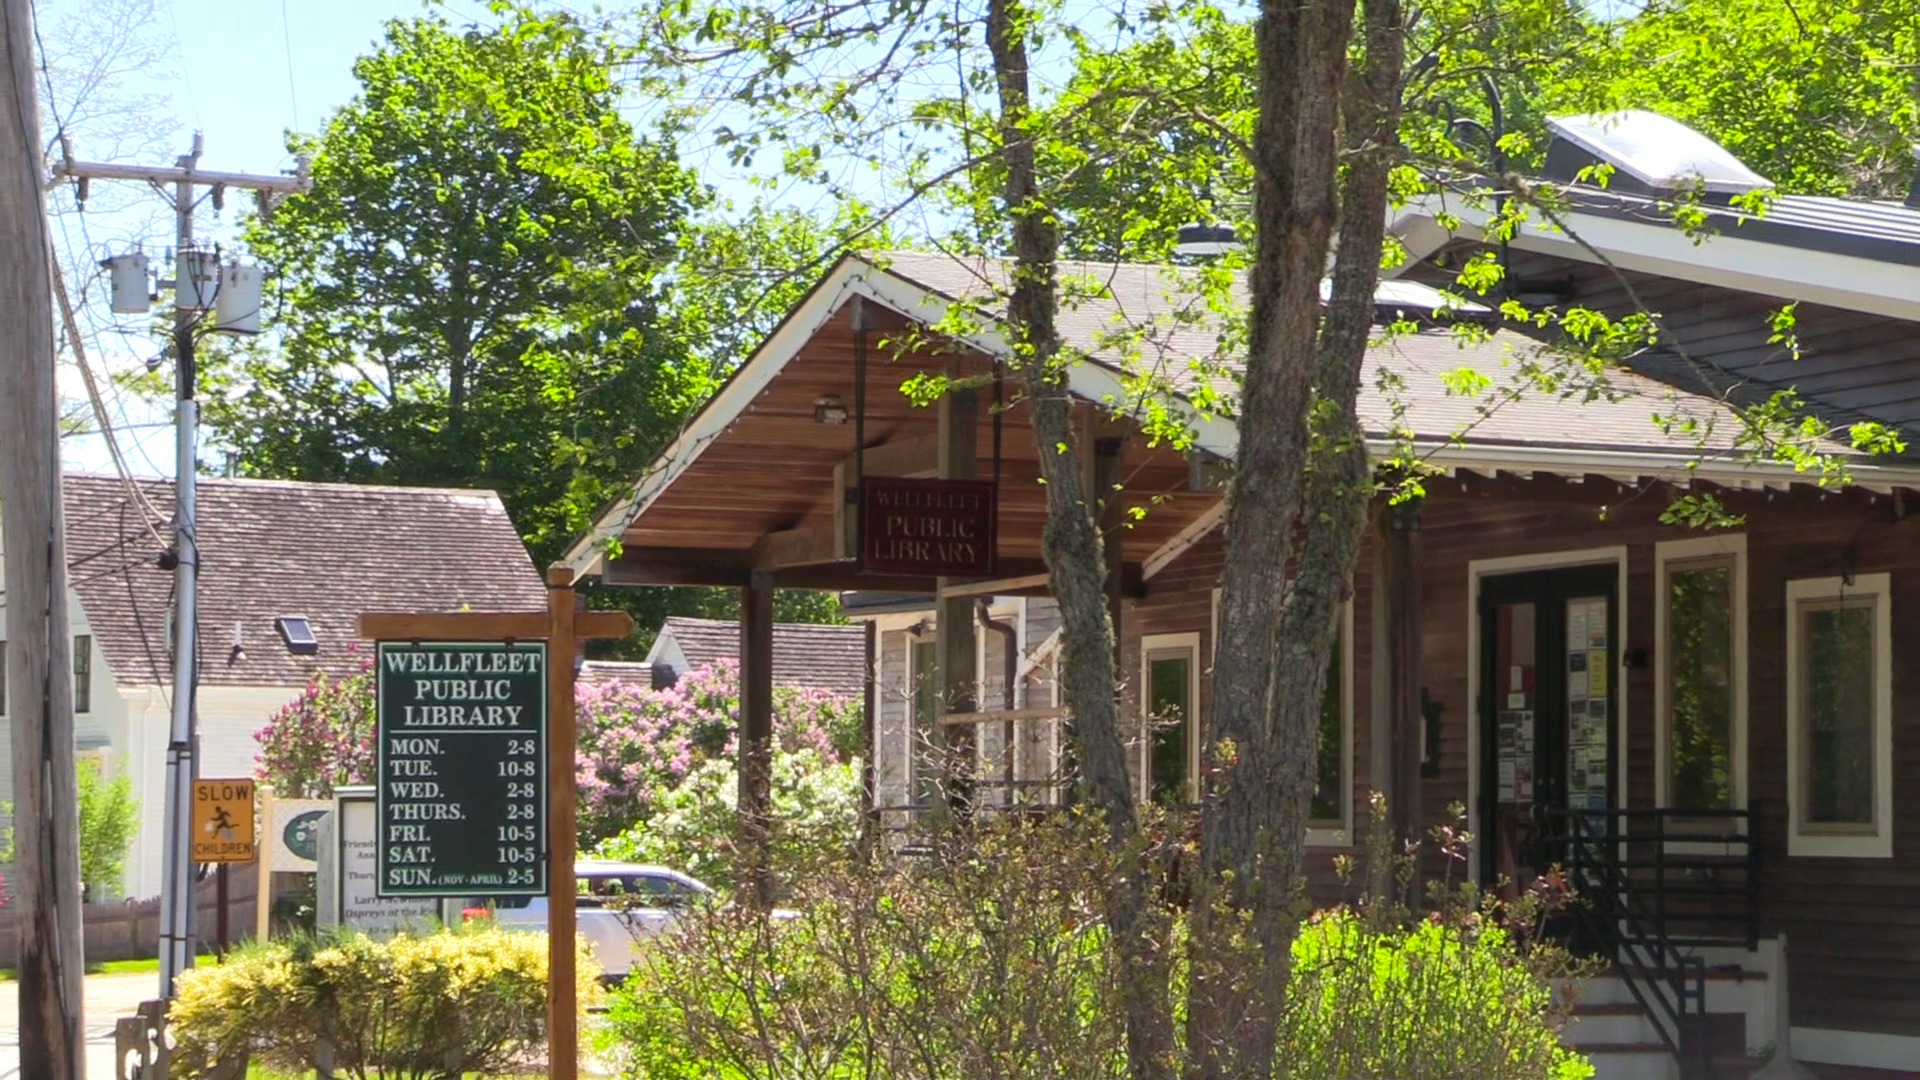 The Wellfleet public library, hosts many Cape Cod family fun events